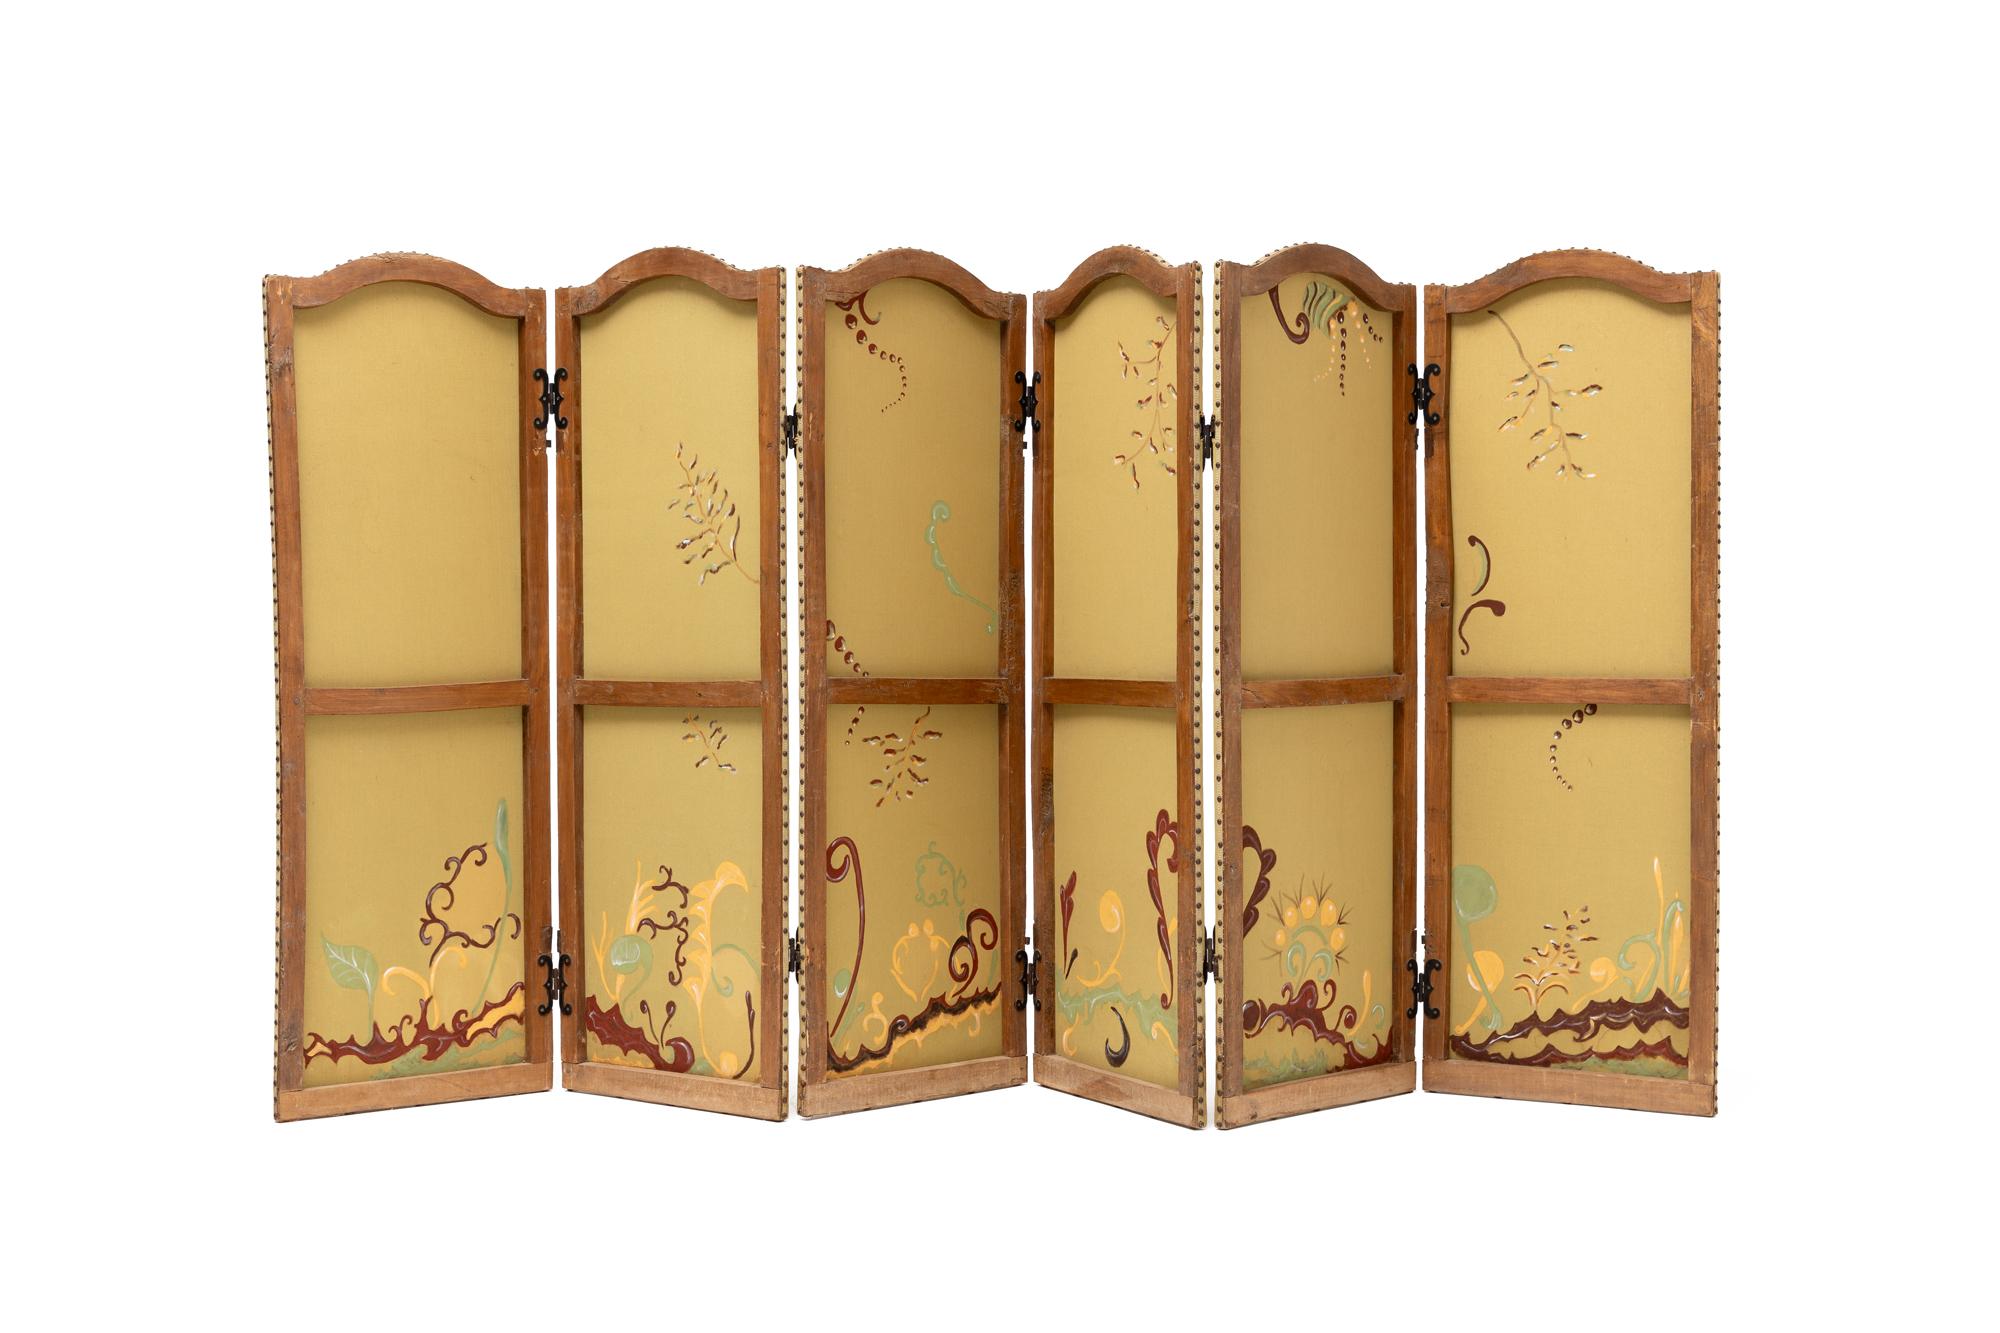 La crème de la crème au chocolat.

Six leaves folding screen, painted fabric decorated with motifs (Camaieu, pistachios, chocolate, vanilla...). Nailhead trim with double golden stitching, on an old wooden frame. France, 1960s/70s.

Dimensions of